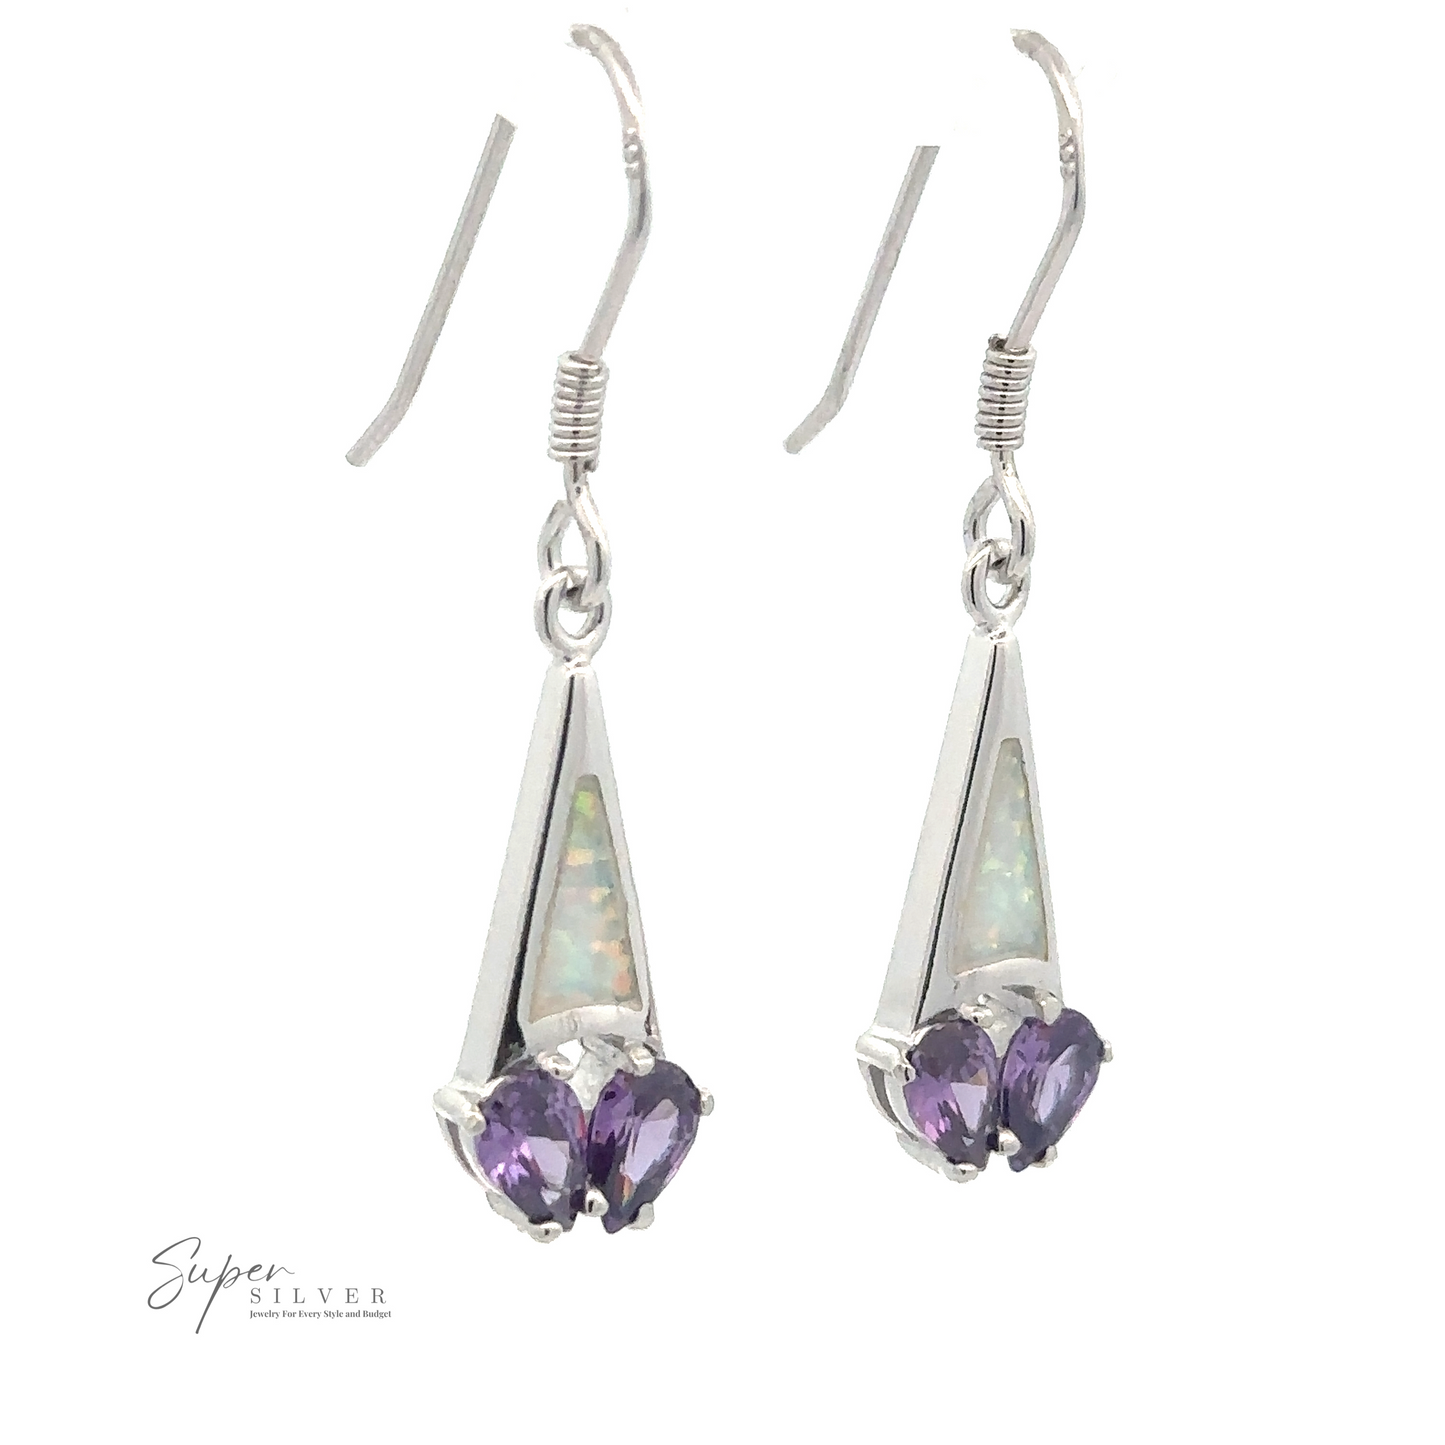 
                  
                    A pair of Created Opal Earrings with Purple Cubic Zirconia featuring triangular created opal stones and purple CZ teardrop gemstones. The earrings are elegantly displayed against a plain, white background with a "Super Silver" logo in the corner.
                  
                